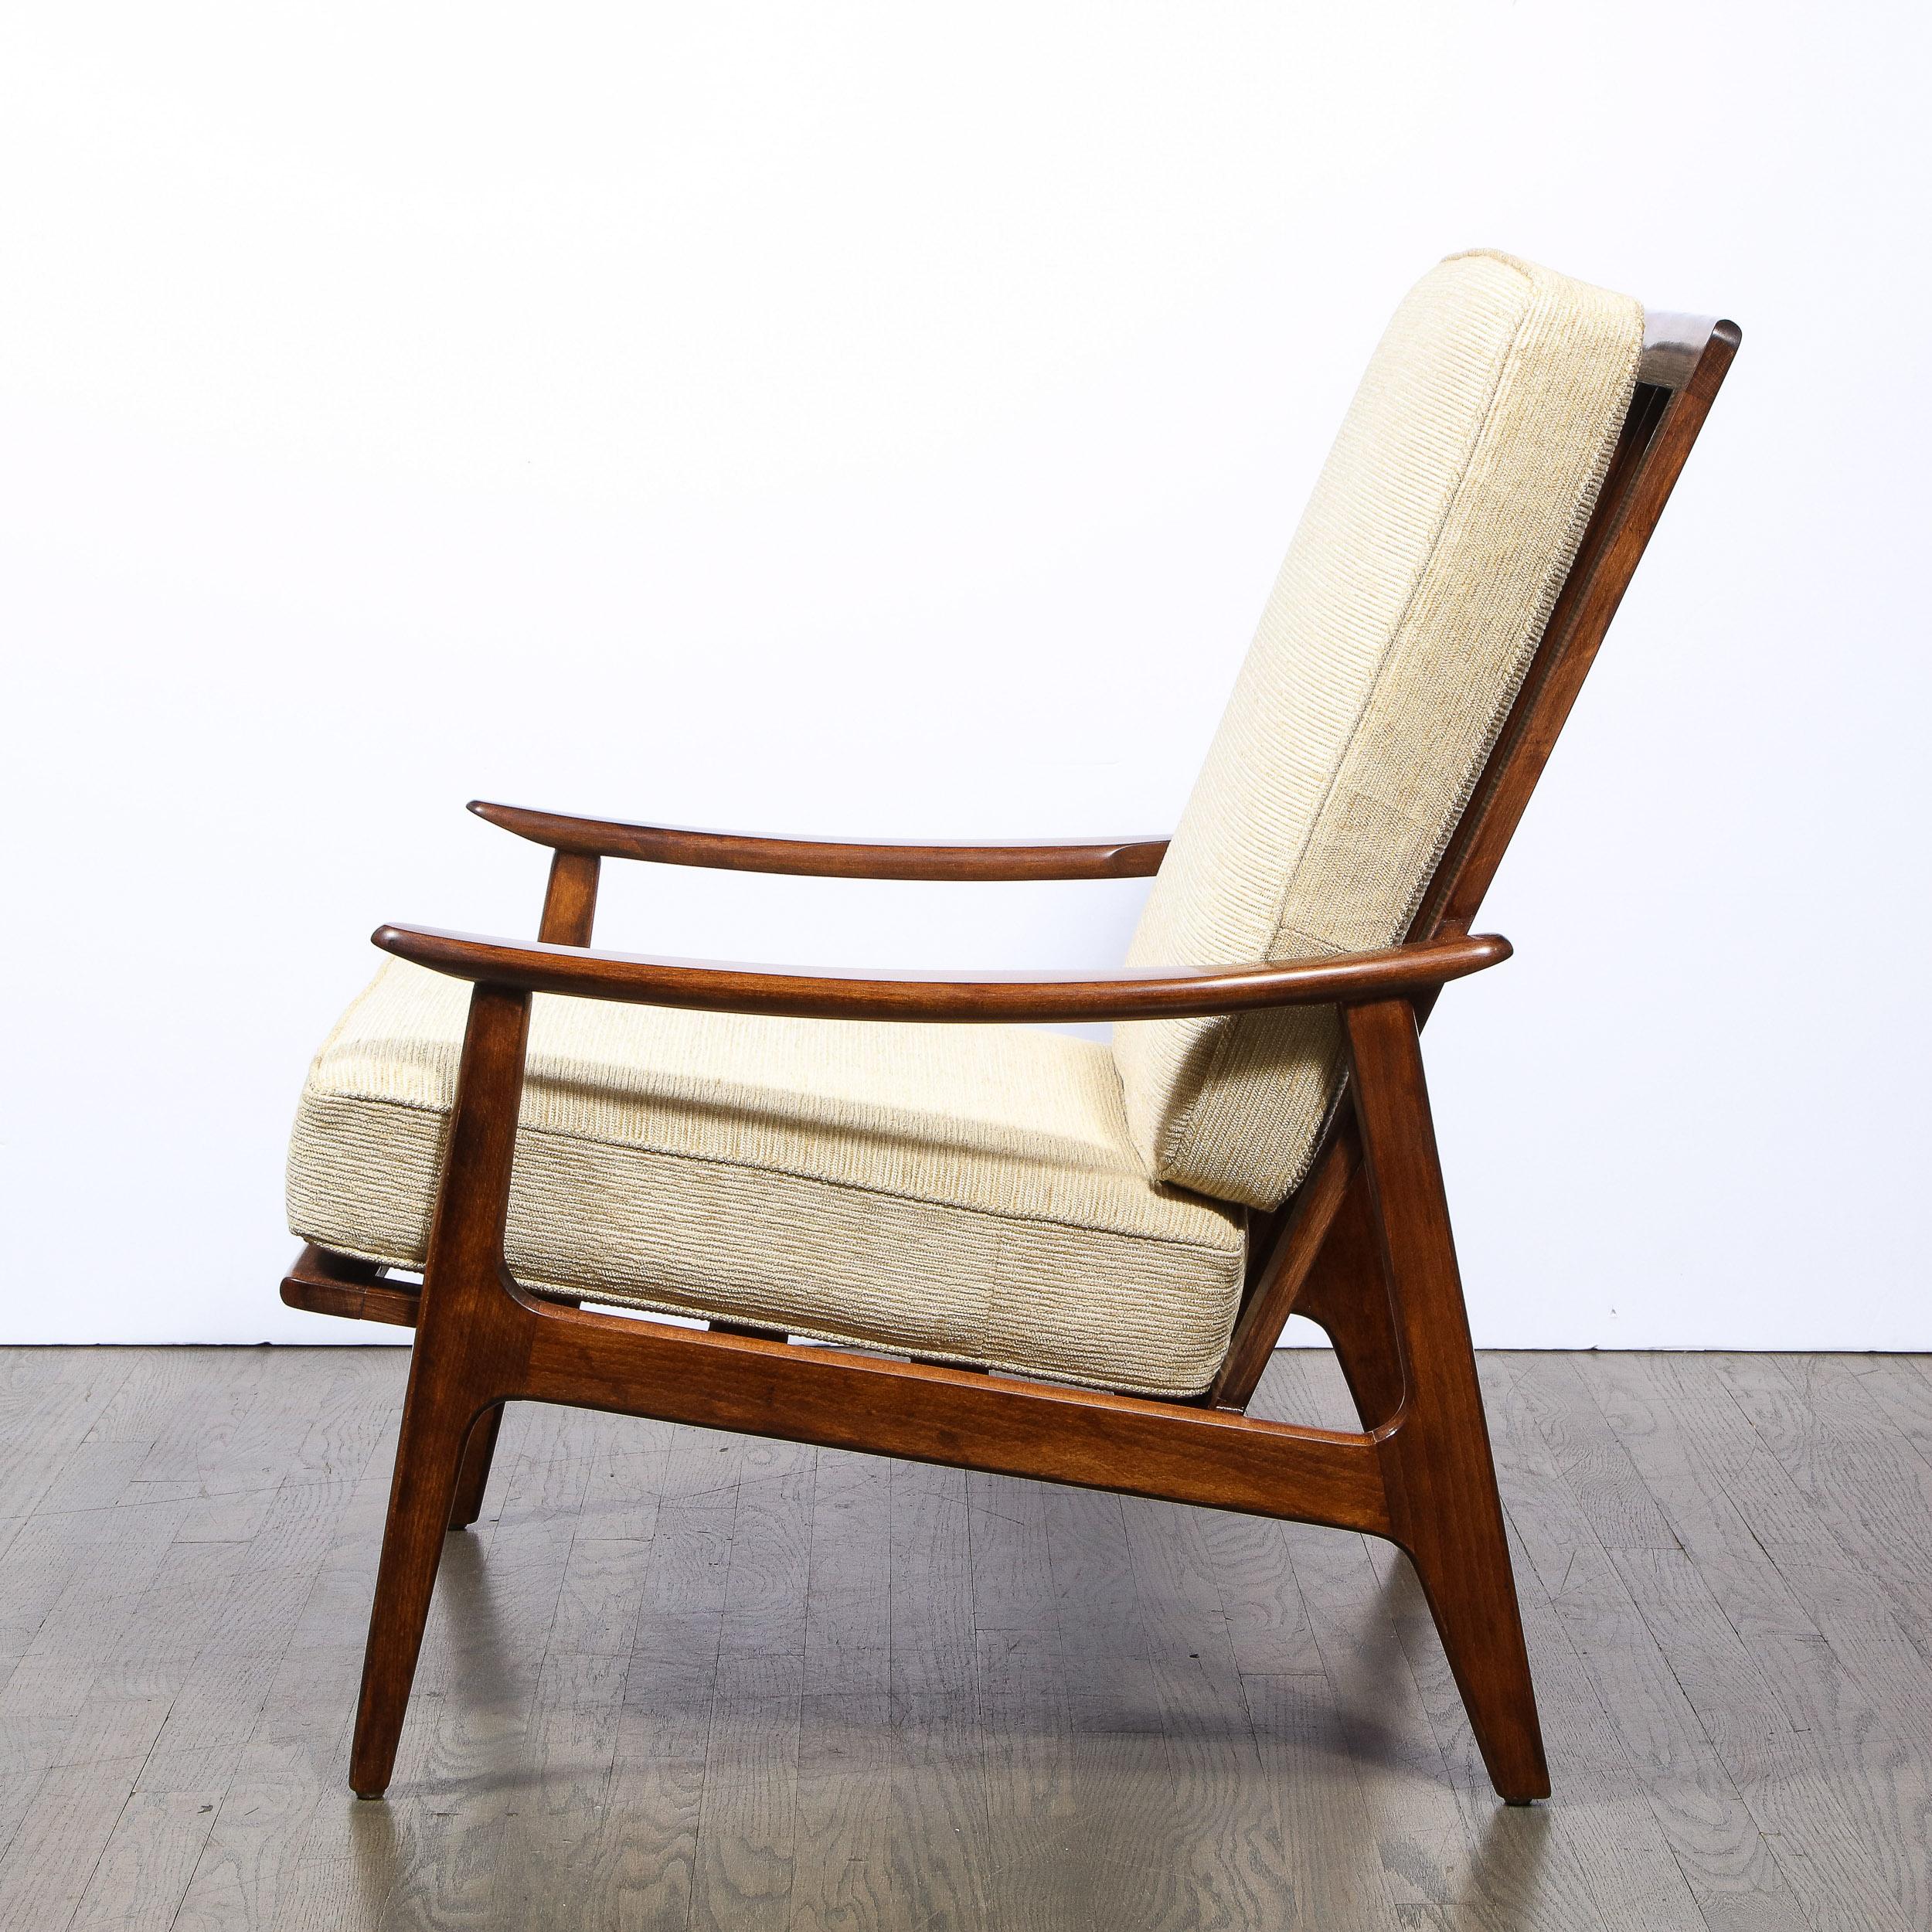 Mid-20th Century Mid-Century Modern Hand Rubbed Walnut Lounge Chair in Holly Hunt Upholstery